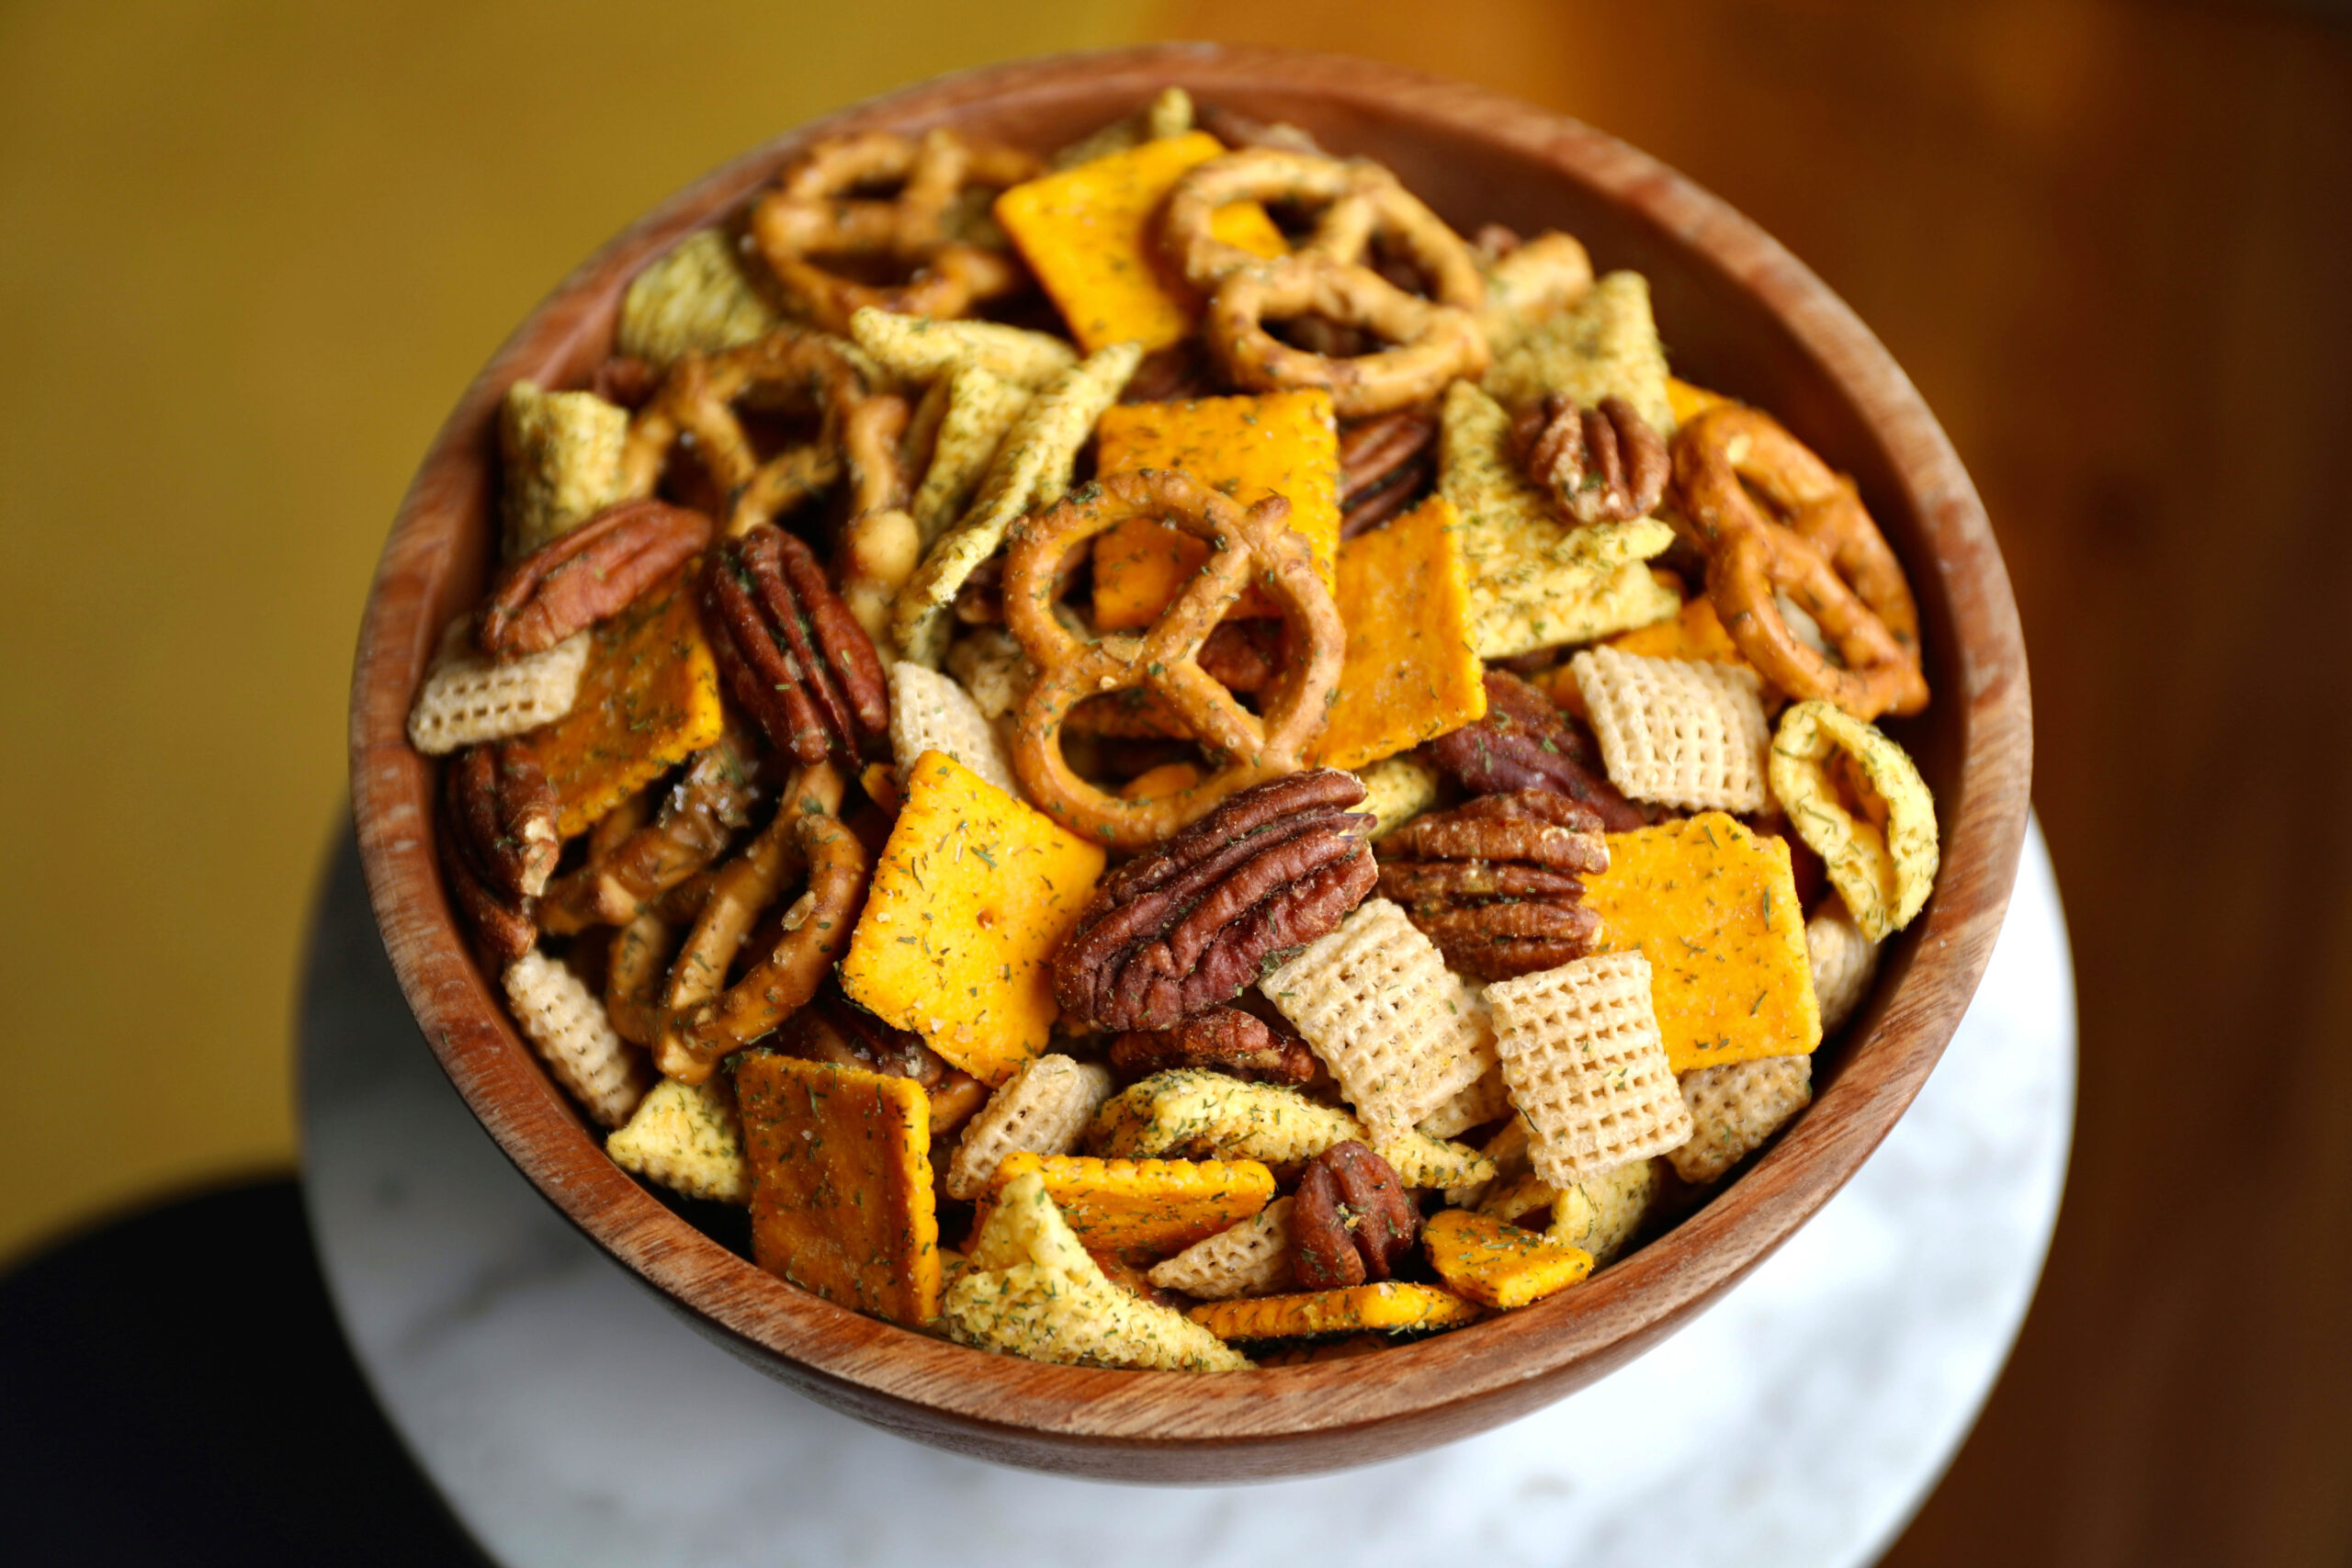 Trail mix created for the APPB's All Mixed Up marketing campaign.